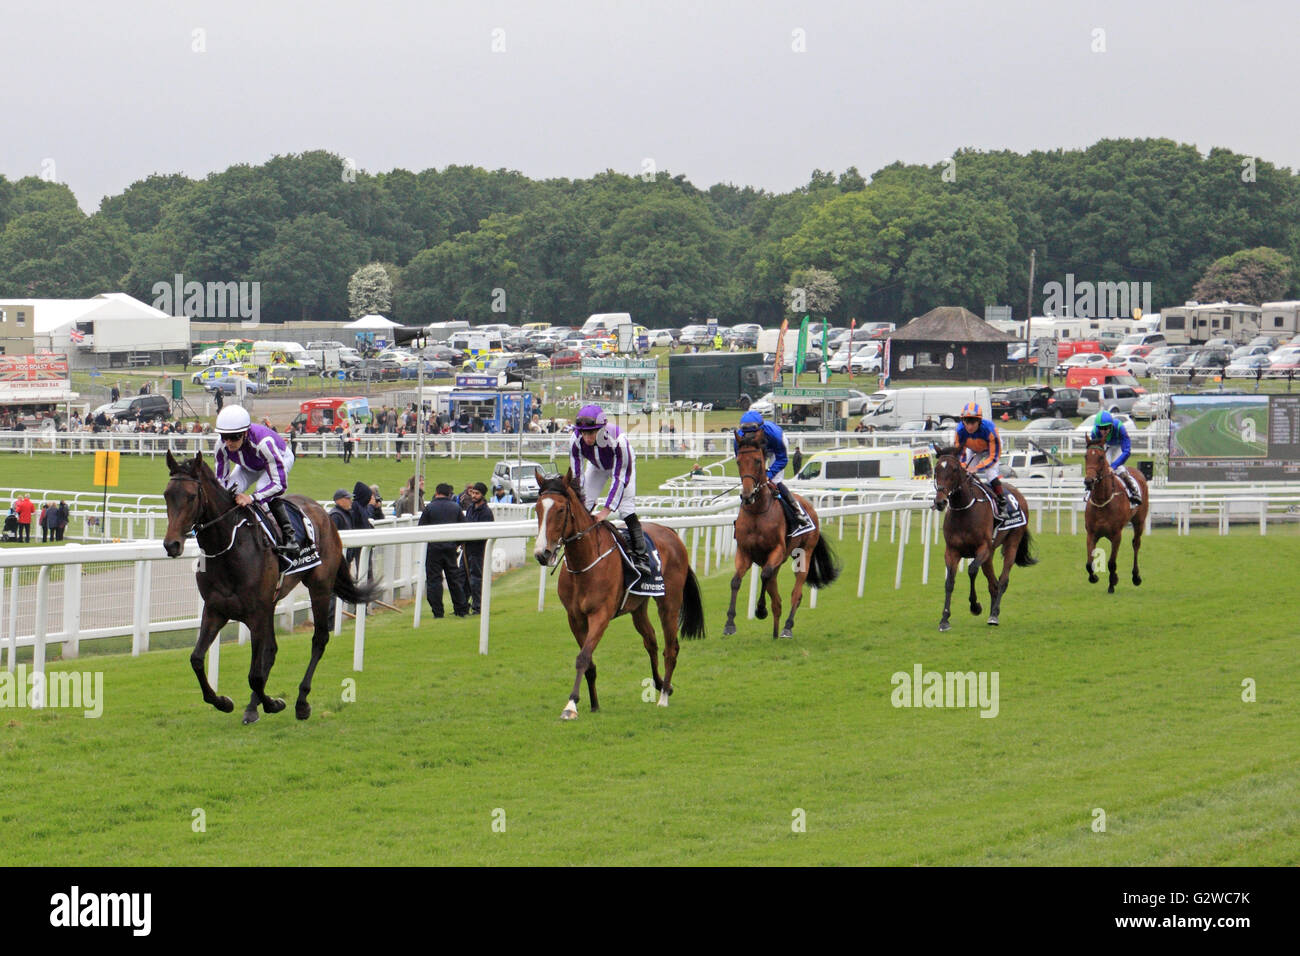 Epsom Downs, Surrey, England, UK. 3rd June 2016. Ladies Day at Epsom Downs race course, where the Investec Oaks is the main race of the day. Here Ryan Moore in purple and white (purple hat) rides No. 5 Minding around Tattenham Corner towards the start of the race. Minding winning the race after beating Frankie Dettori on Architecture in the home straight. Credit:  Julia Gavin UK/Alamy Live News Stock Photo